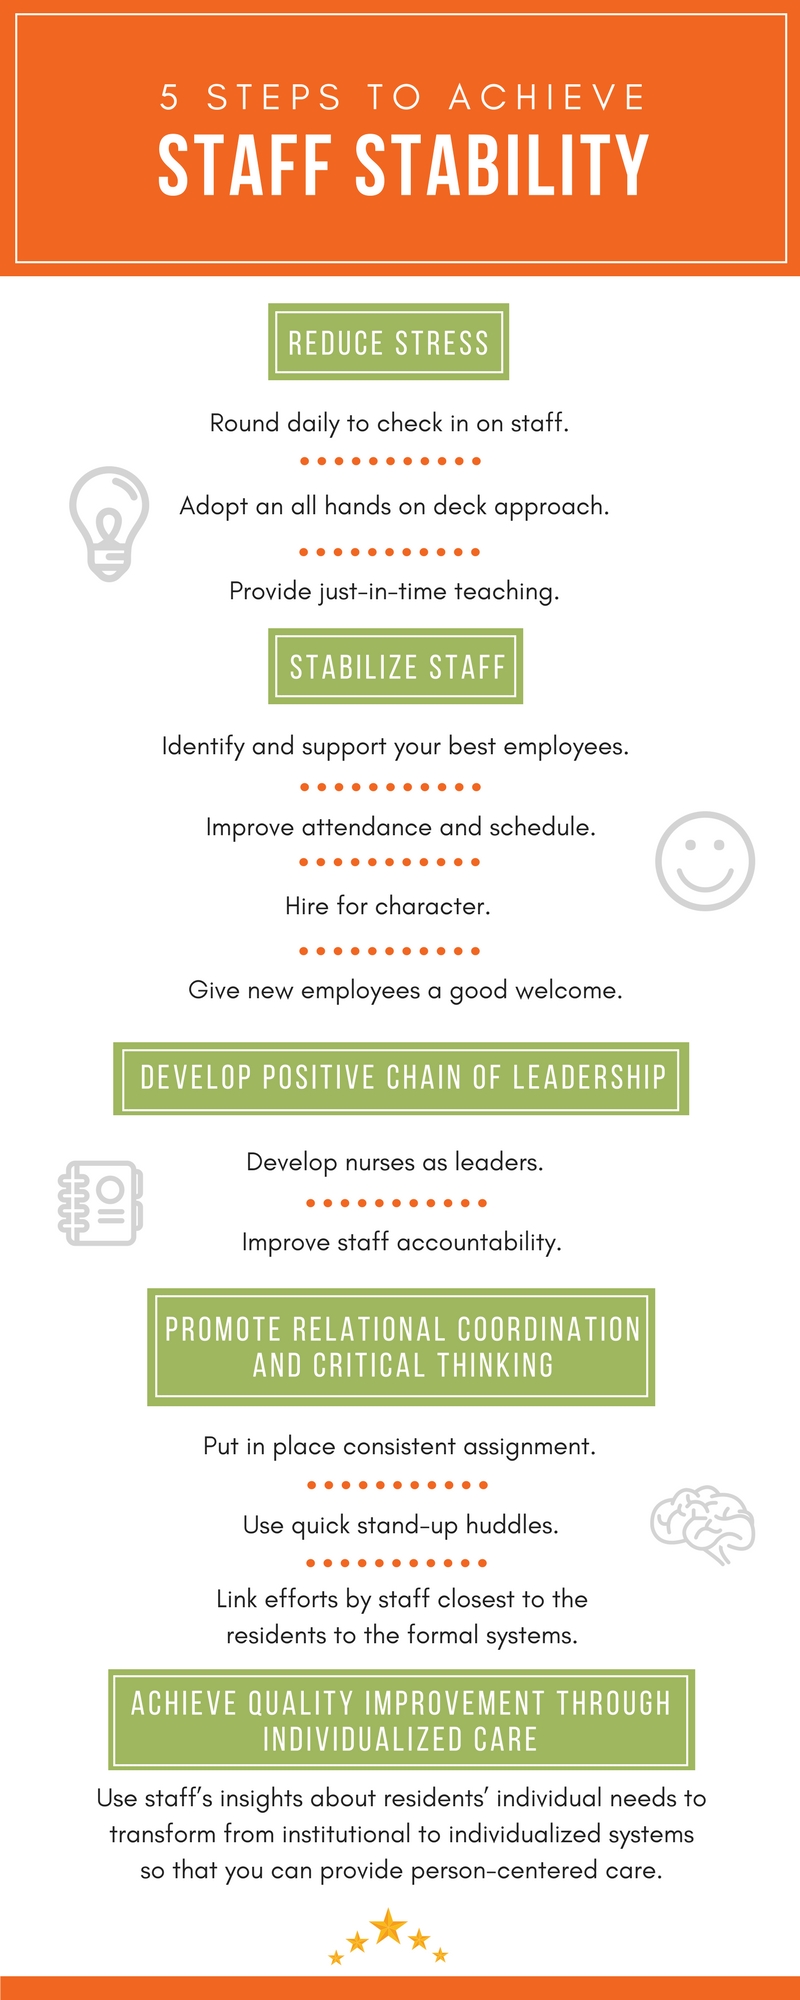 5 Steps to Achieve Staff Stability Infographic